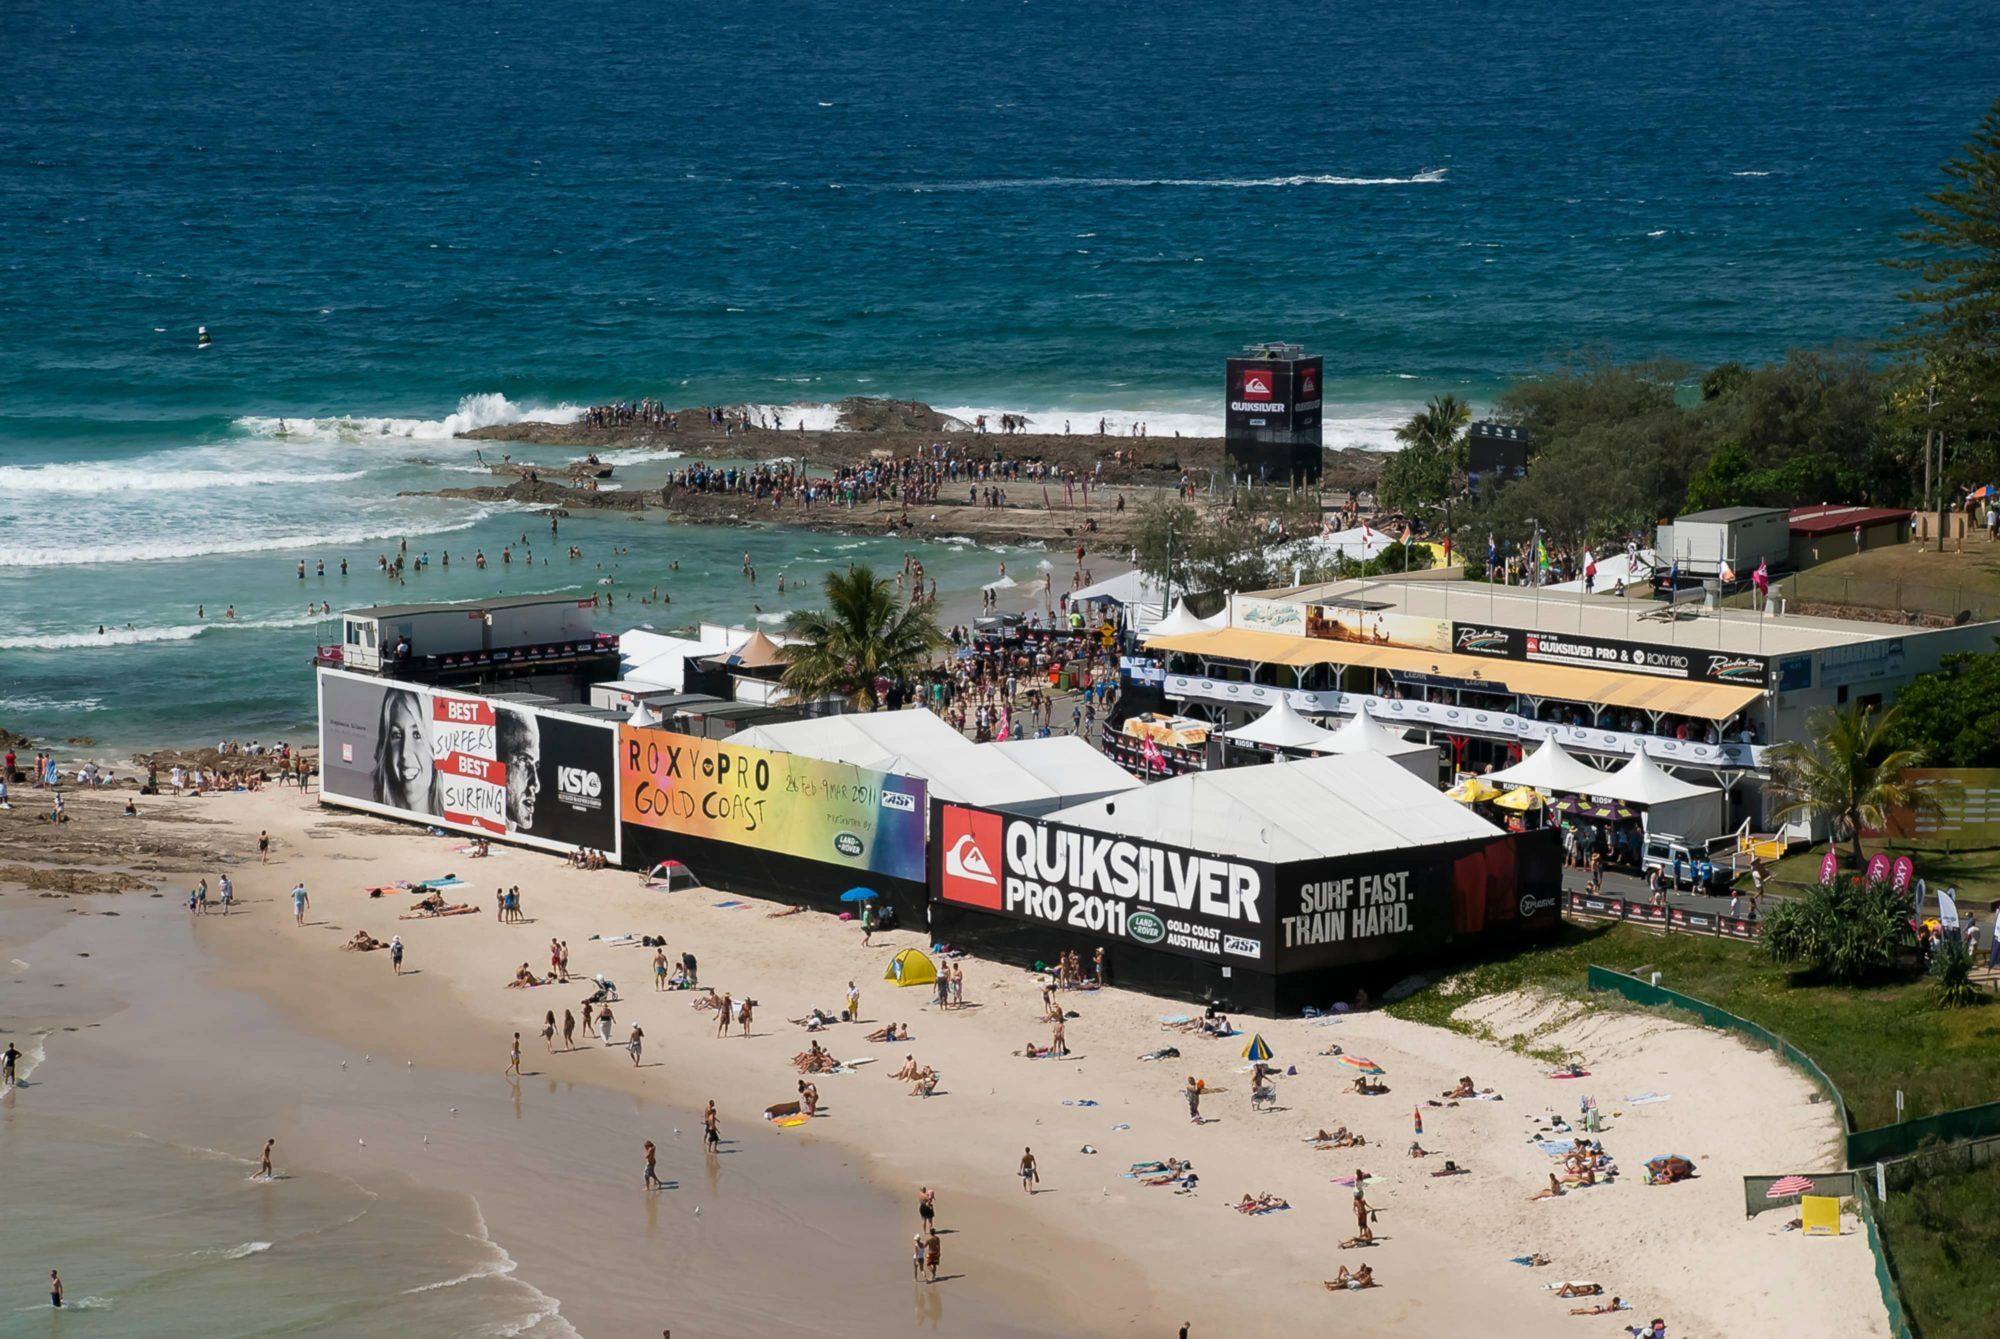 18-facts-about-quiksilver-and-roxy-pro-snapper-rocks-surfing-competitions